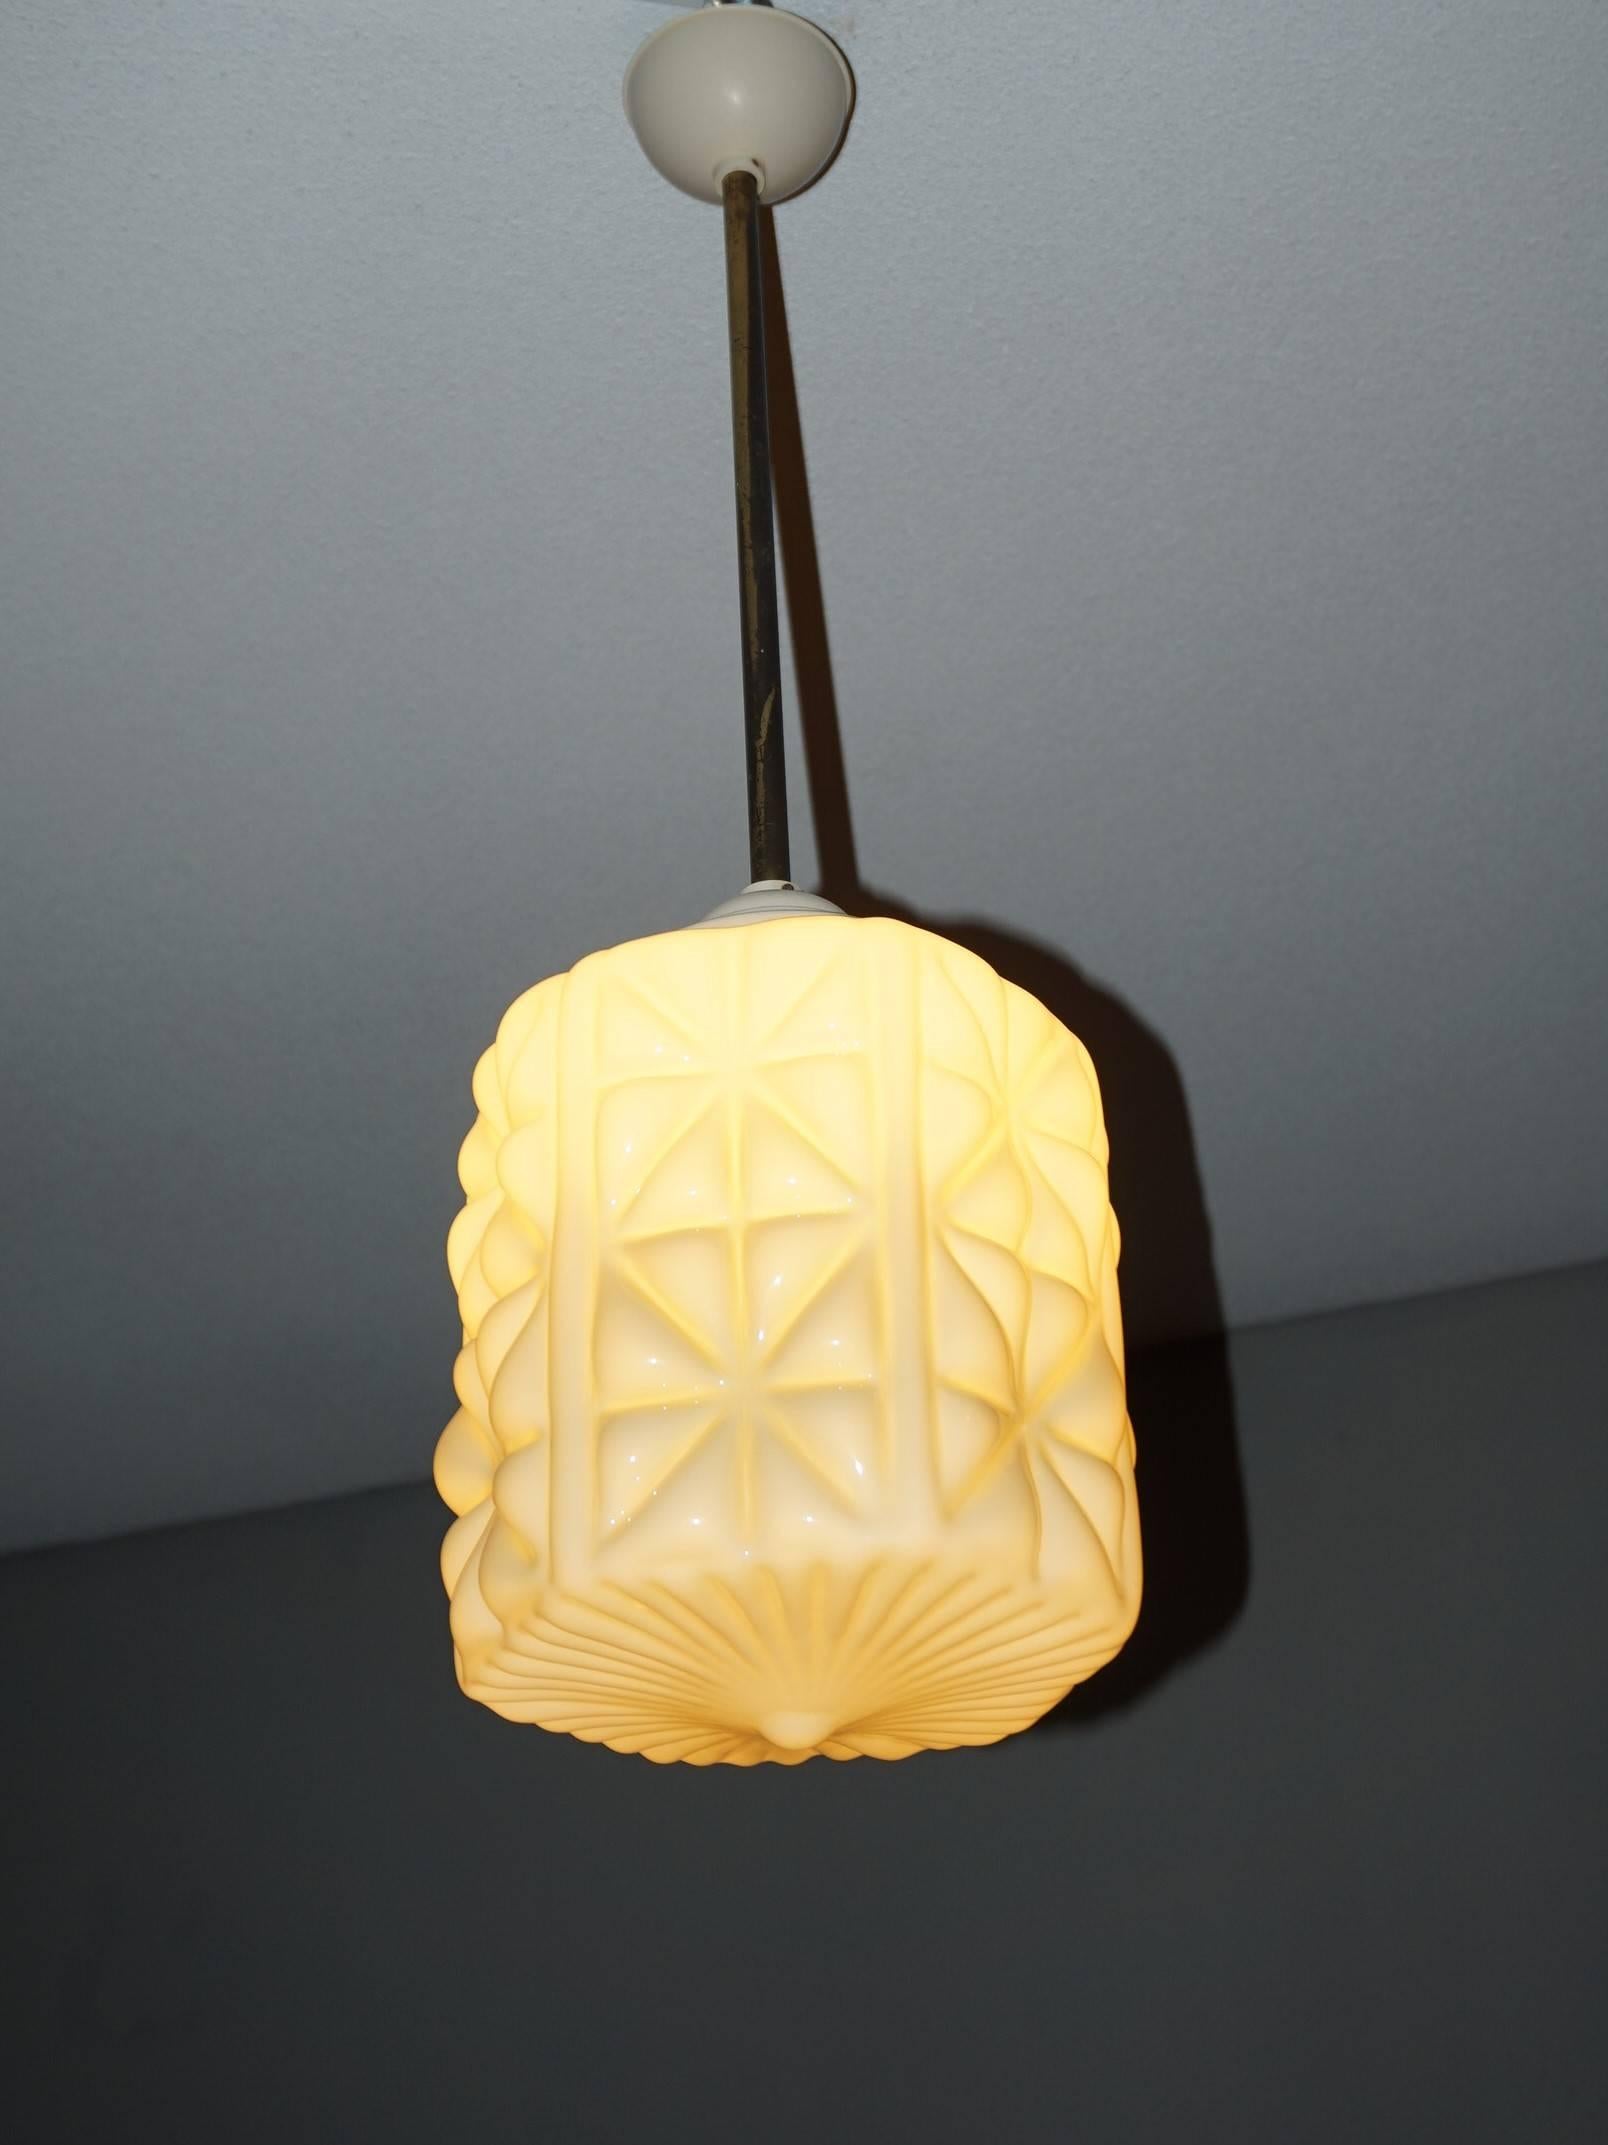 Hand-Crafted Early 20th Century Art Deco Glass, Brass & White Bakelite Pendant Light Fixture